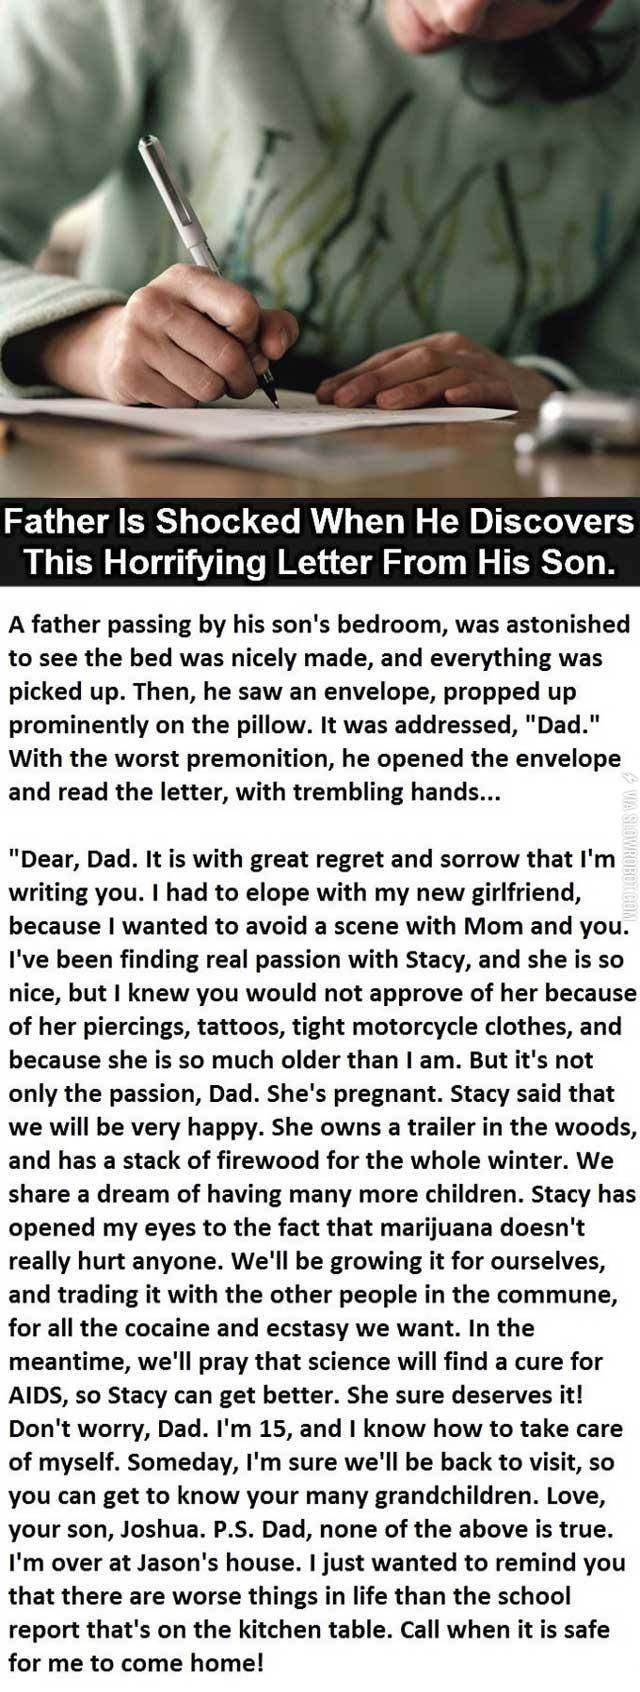 Father+is+shocked+when+he+discovers+this+horrifying+letter+from+his+son.